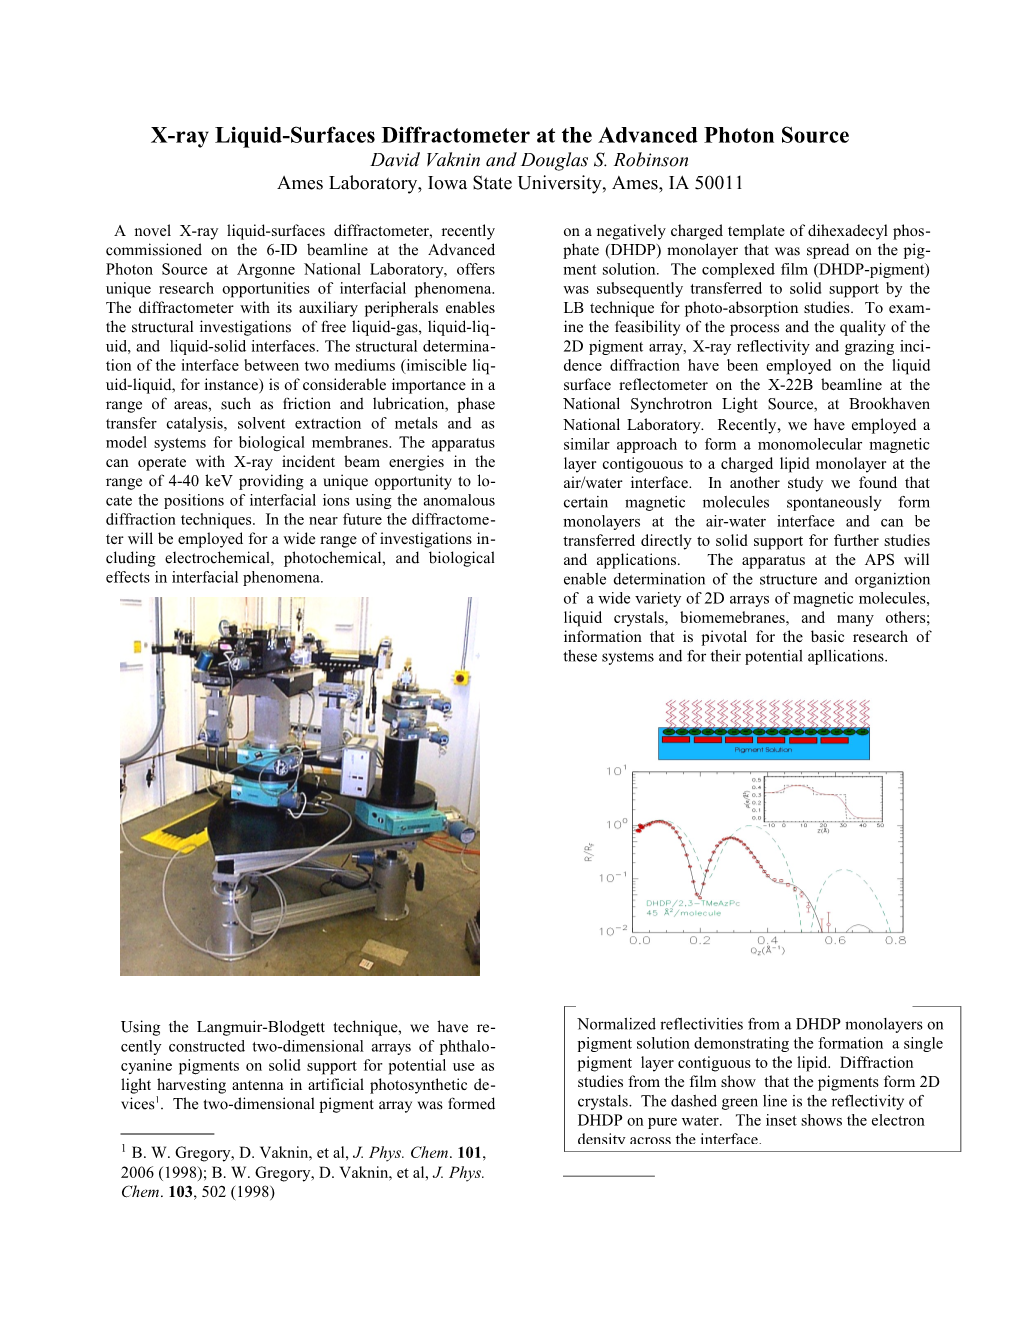 X-Ray Liquid-Surfaces Diffractometer at the Advanced Photon Source